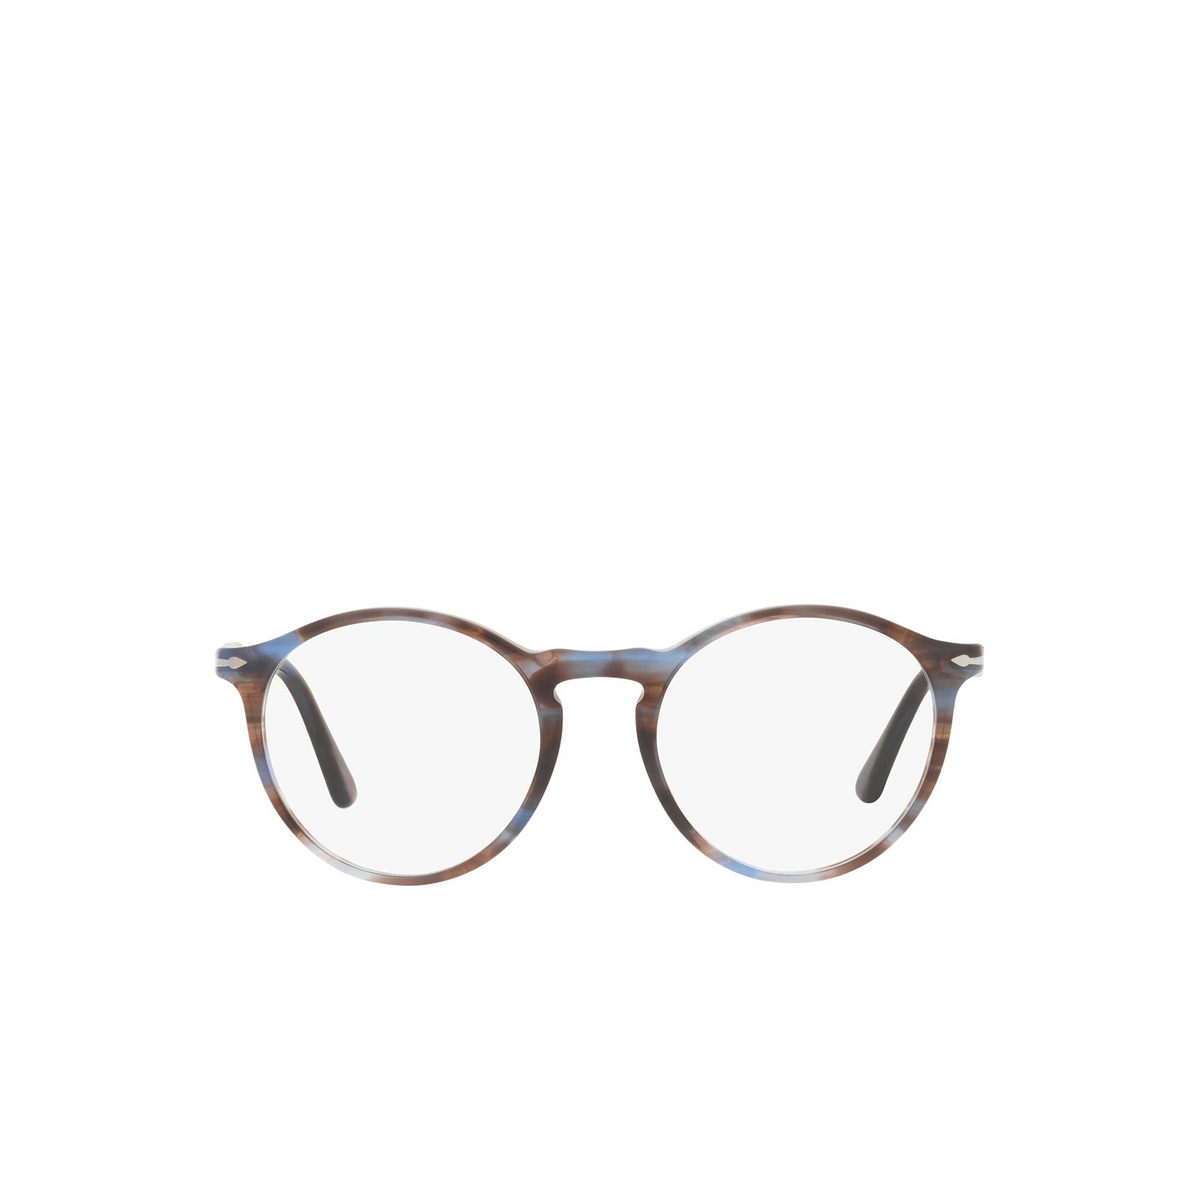 Persol® Round Eyeglasses: PO3285V color Striped Blue 1155 - front view.